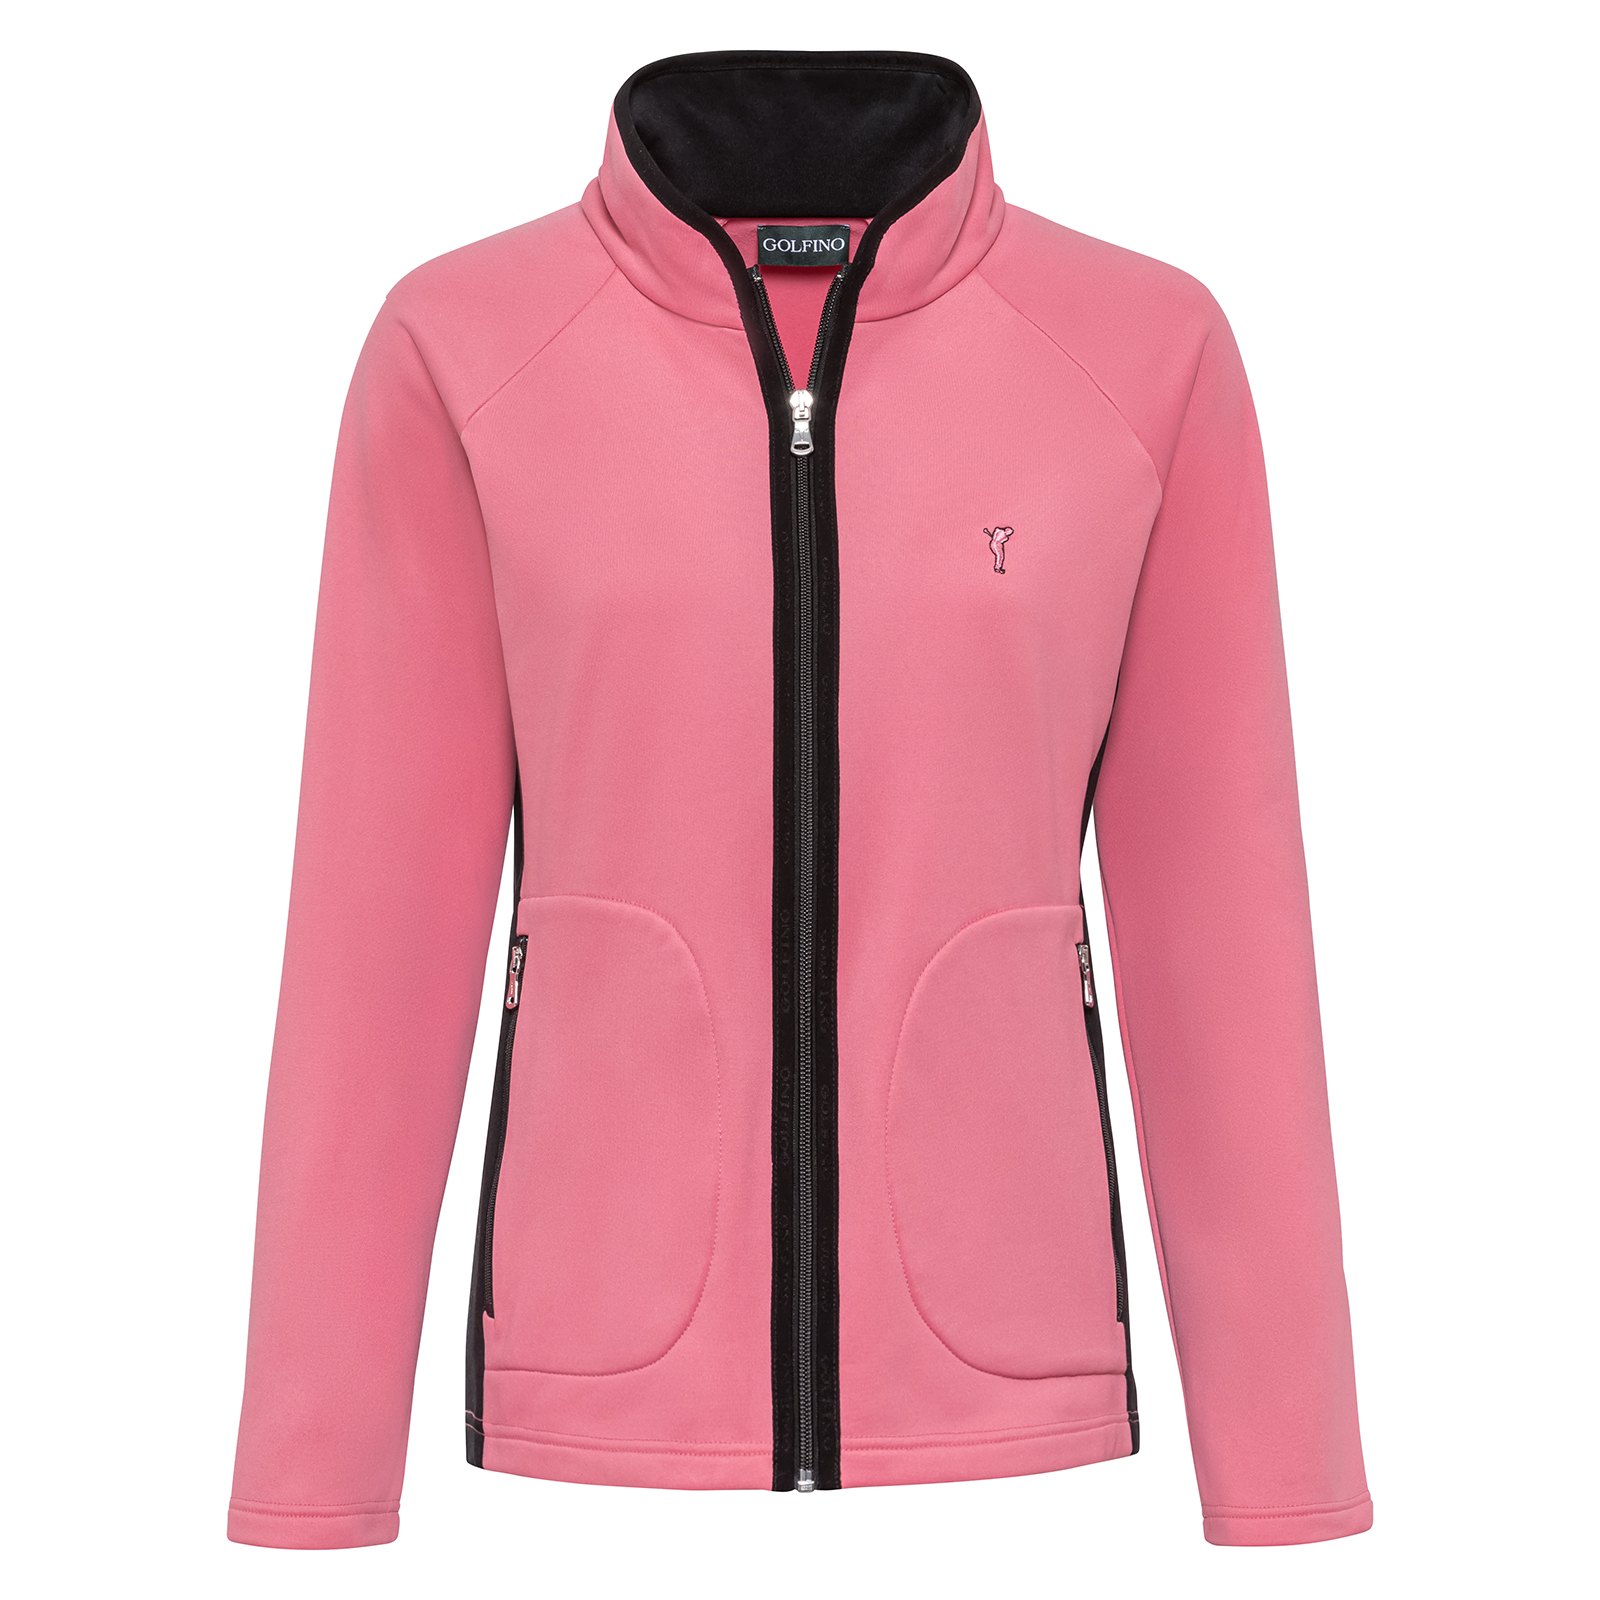 Ladies' fleece golf jacket with cold weather protection